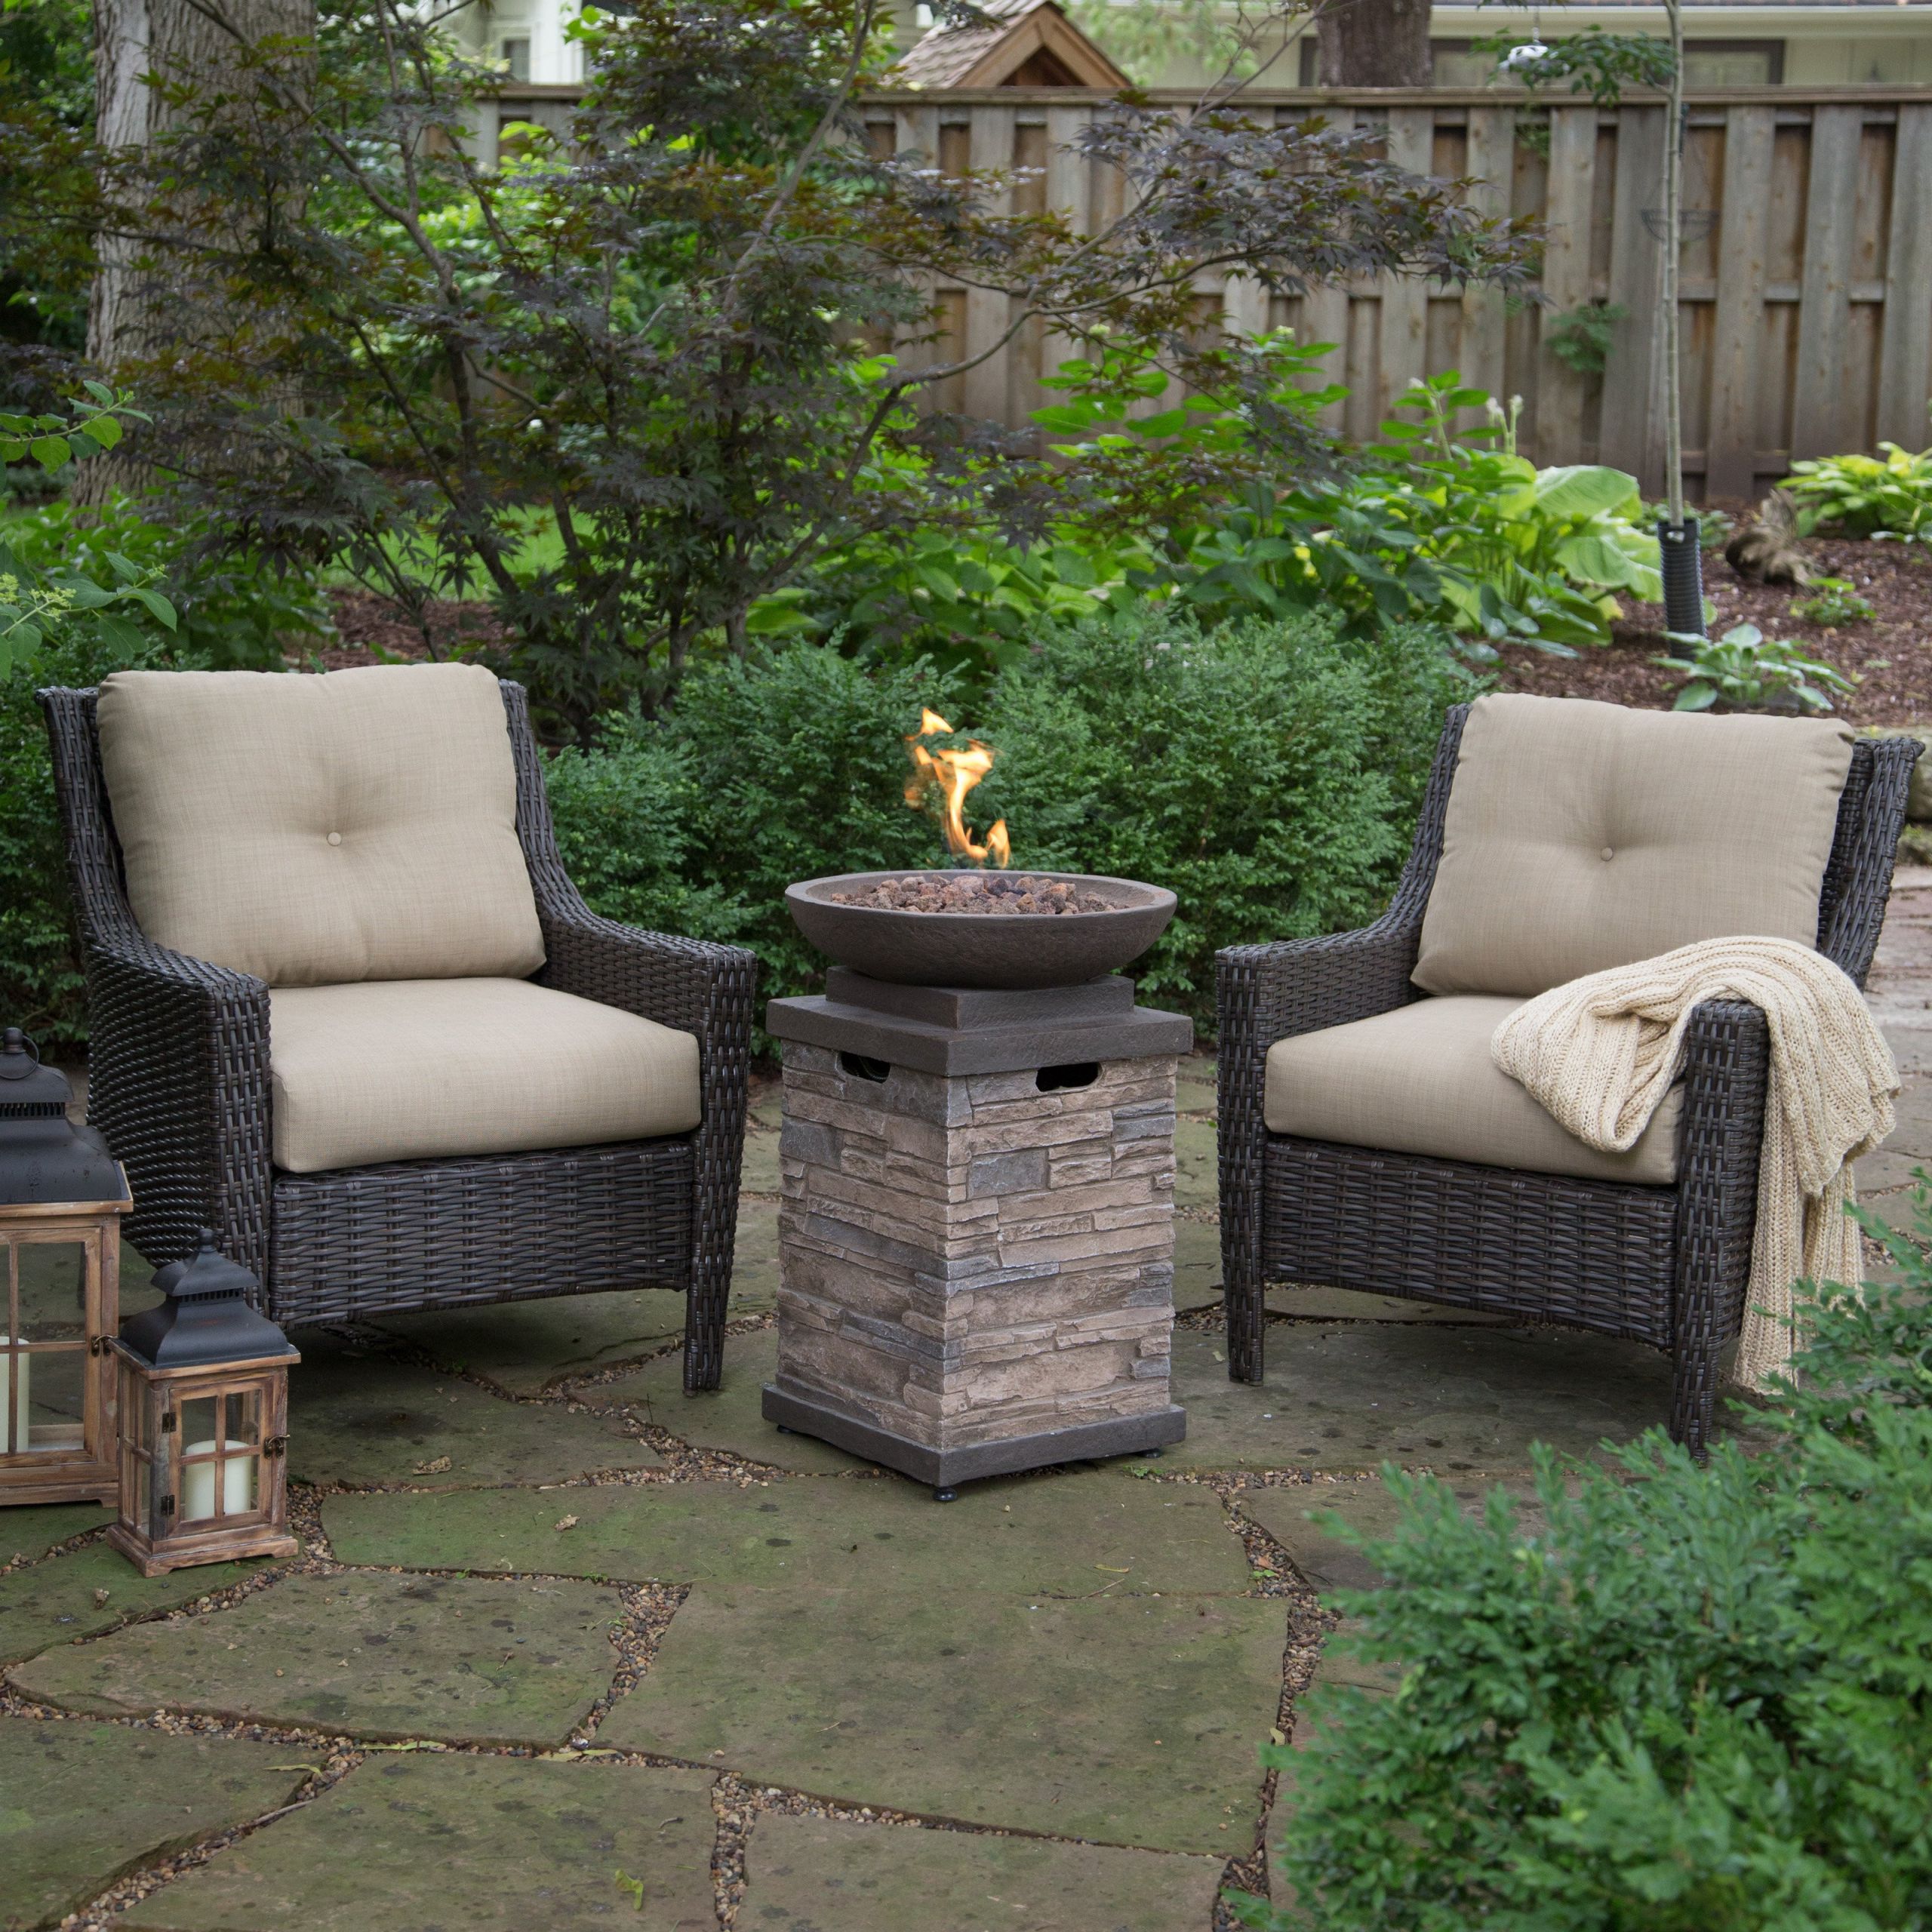 Patio Sets With Fire Pit
 Belham Living Springfield Wicker Chat Set with Red Ember